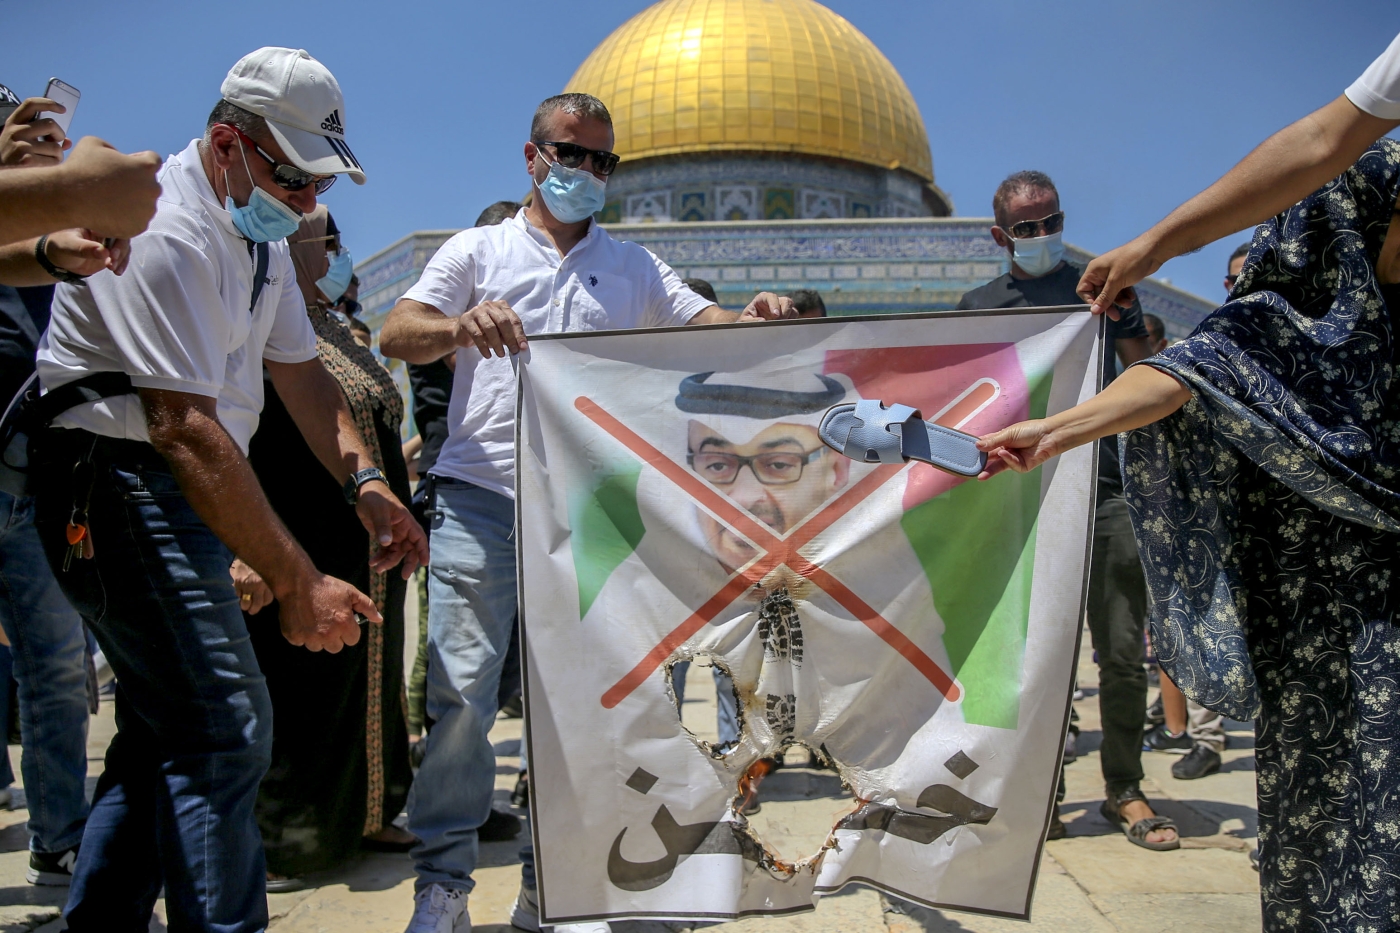 Palestinians protest in Jerusalem over the UAE-Israel diplomatic normalisation